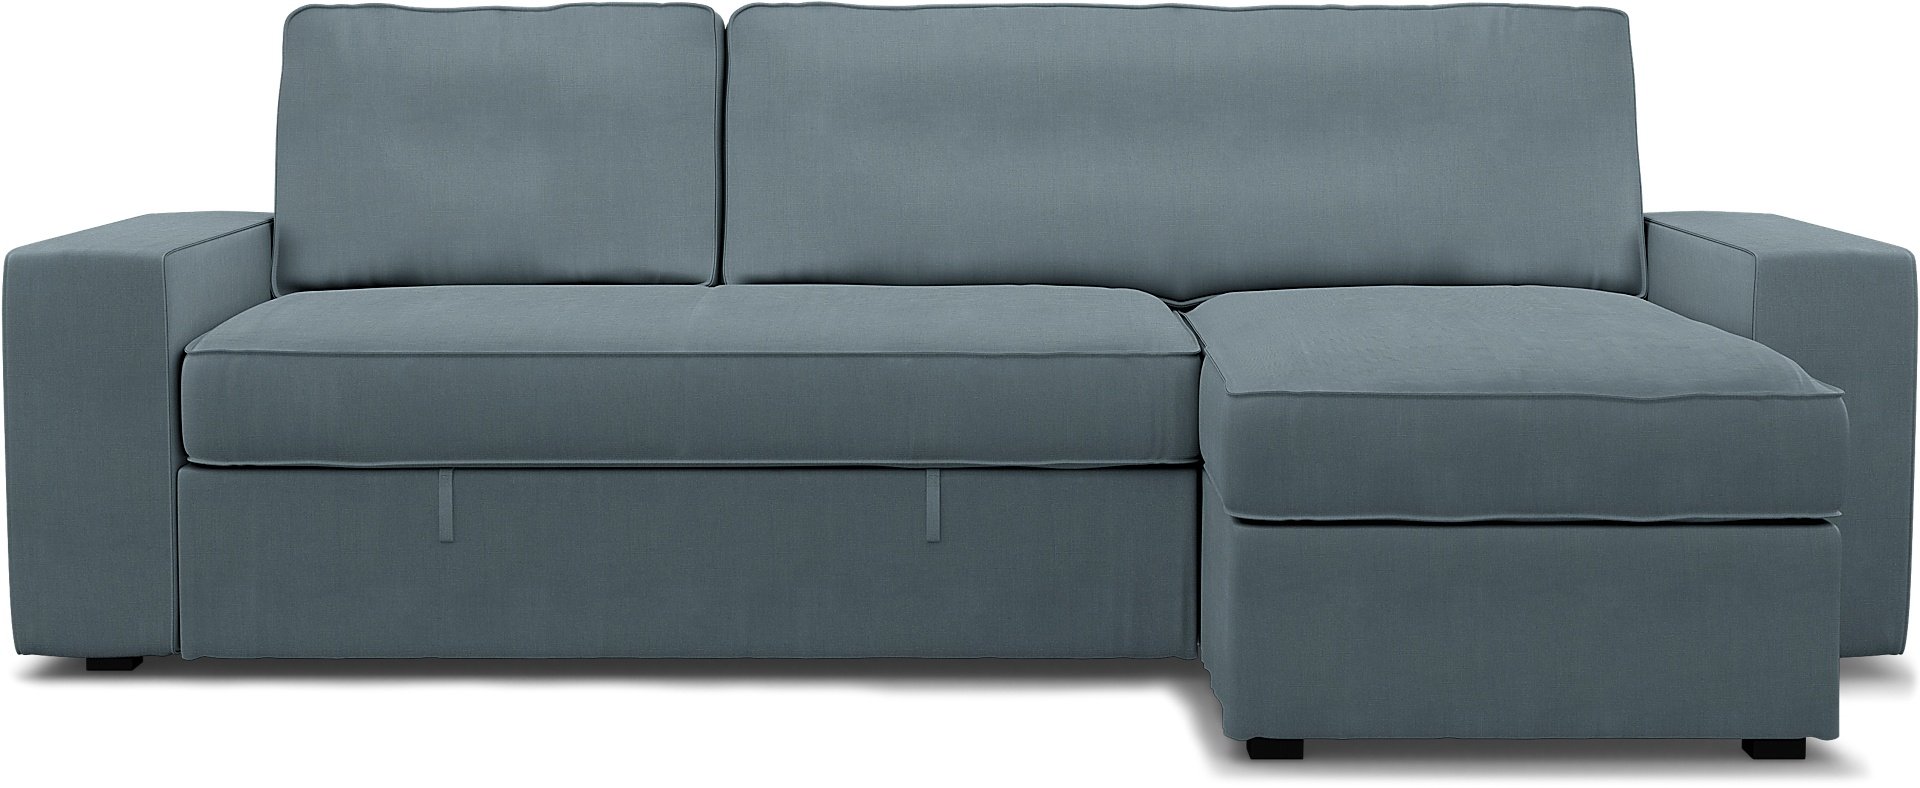 IKEA - Vilasund sofa bed with chaise cover, Dusk, Linen - Bemz